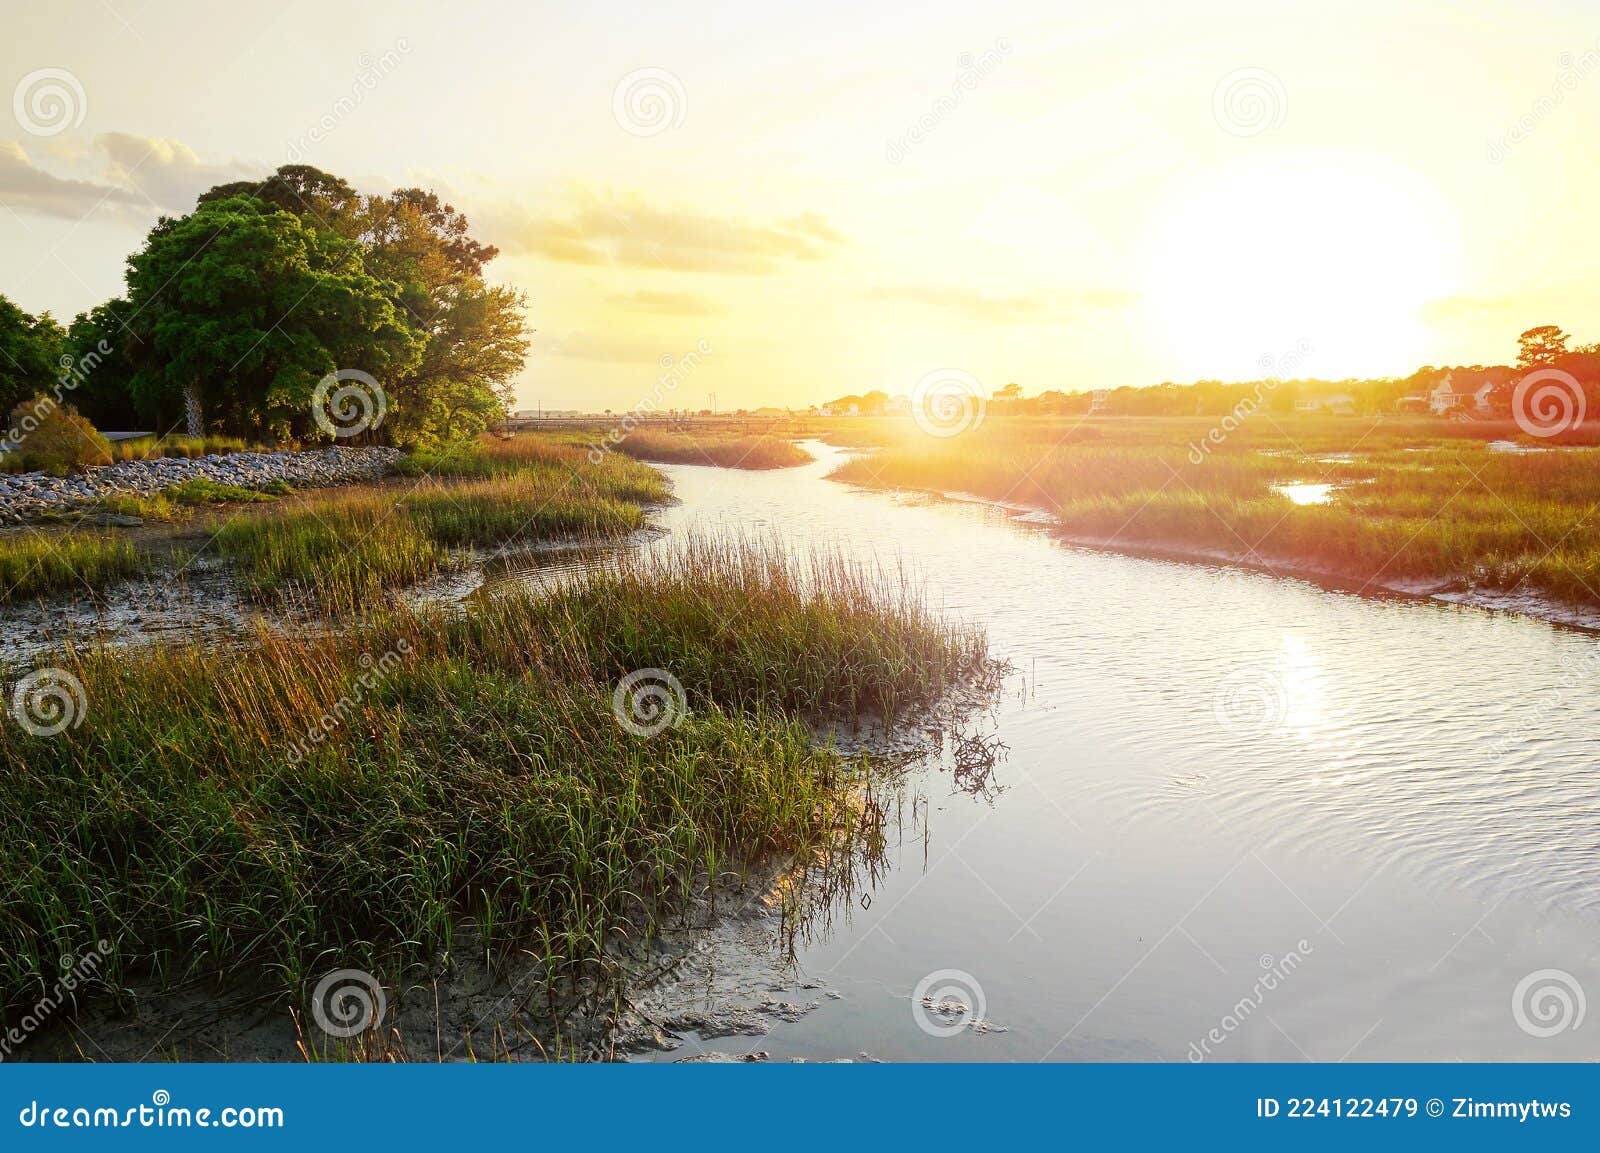 sunset view along the marsh in the low country near charleston sc